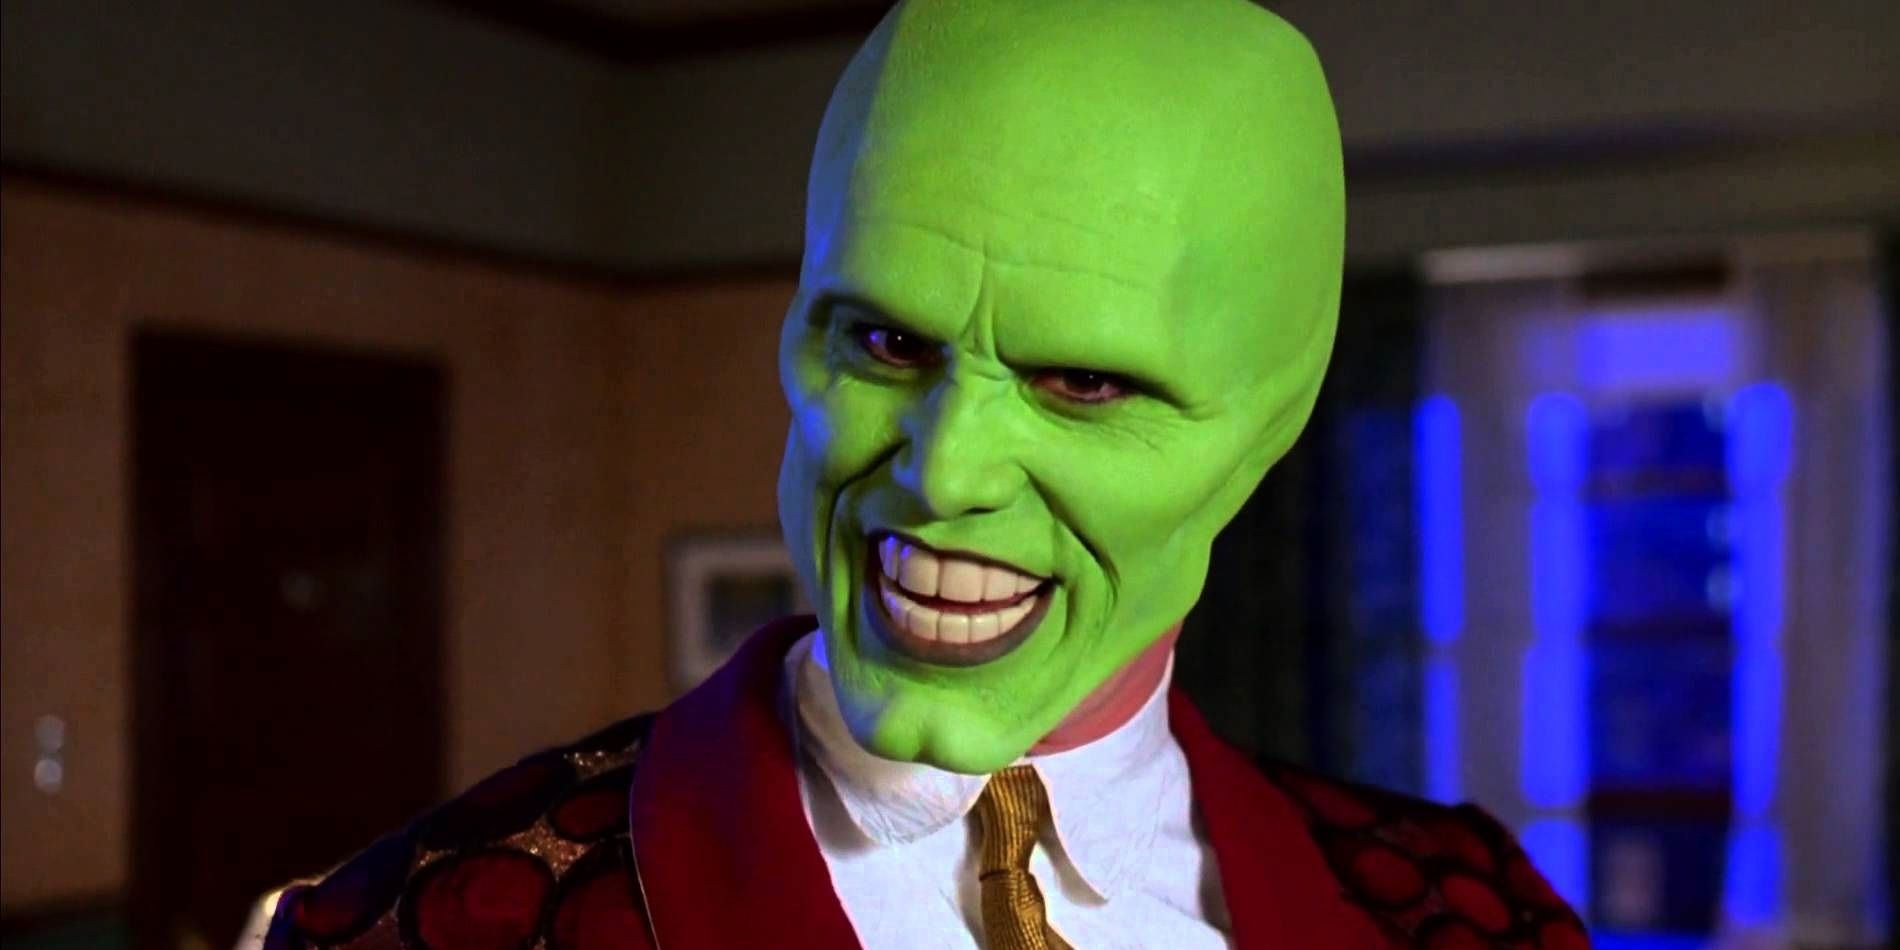 The Mask (Jim Carrey) addressing the camera in The Mask